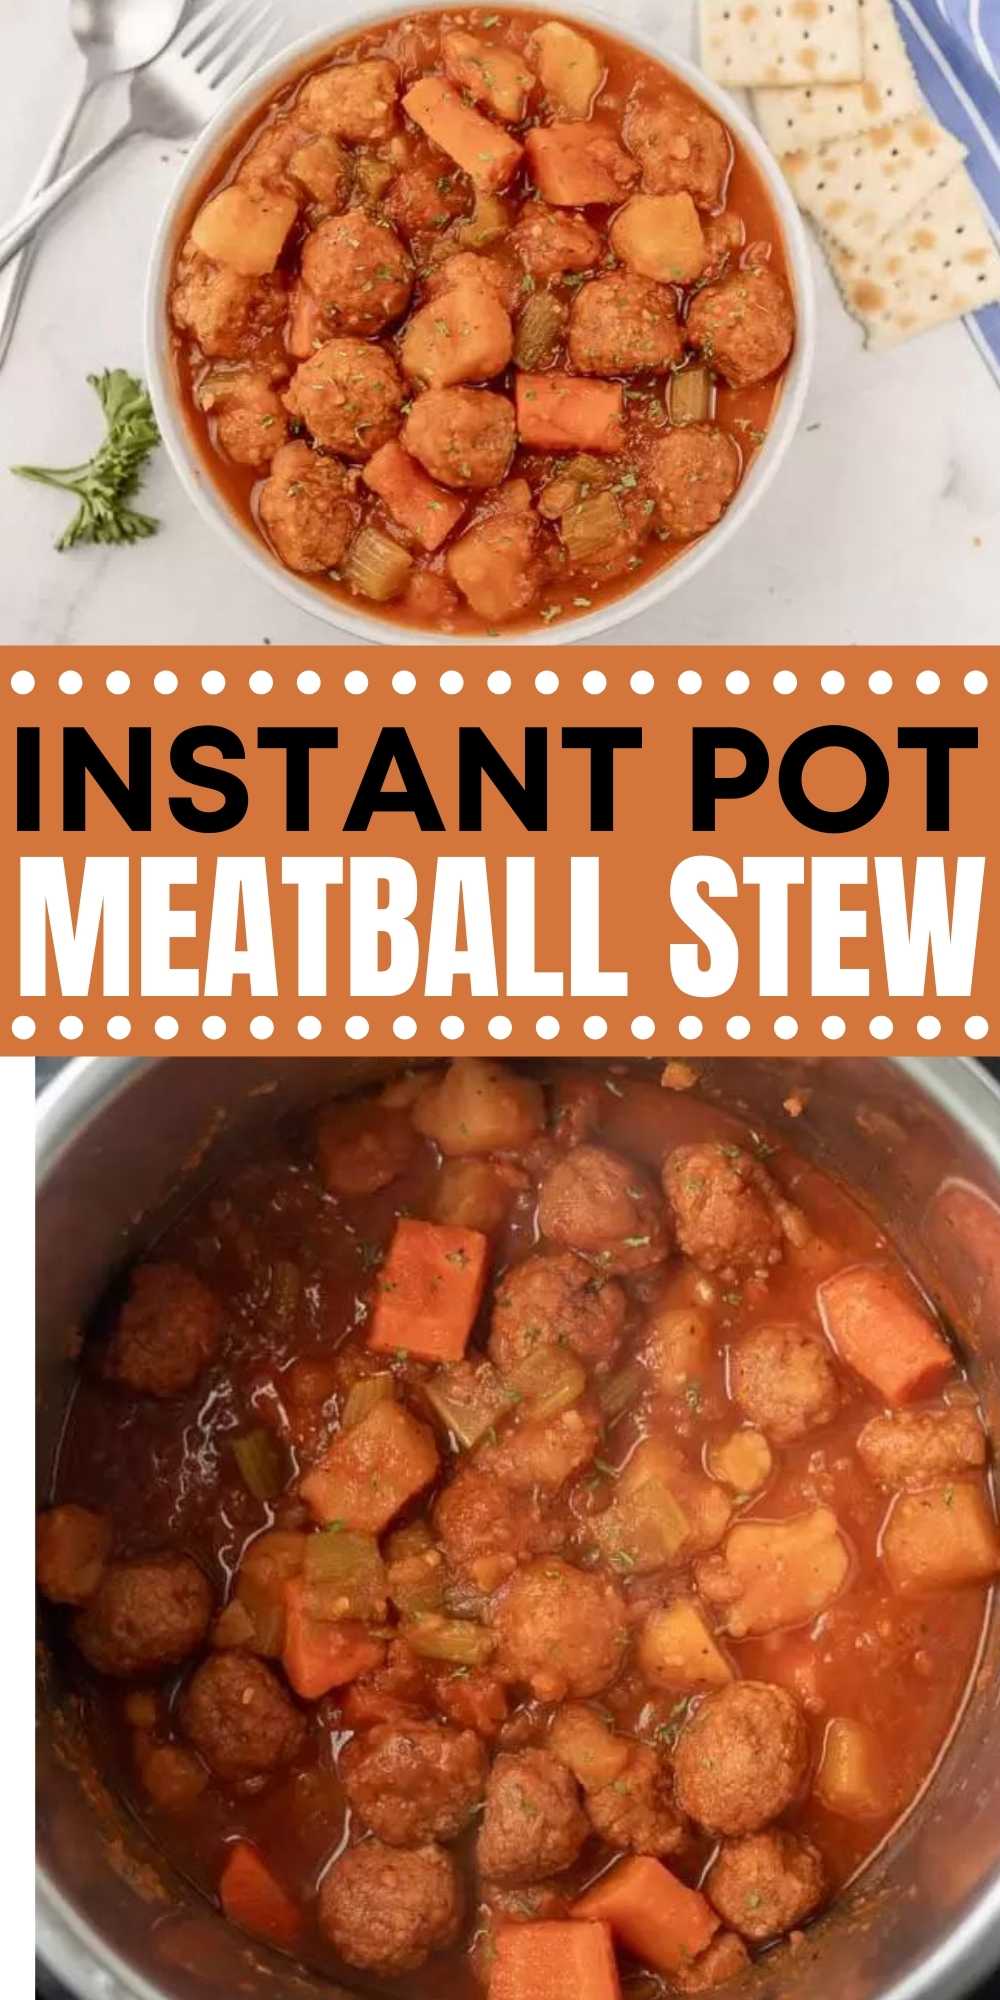 Instant Pot Meatball Stew Recipe is simple and delicious. Ready in just minutes, Meatball Stew Instant Pot Recipe is the perfect weeknight dinner idea. You will love this easy instant pot soup recipe that can be made in no time at all in an electric pressure cooker.  #eatingonadime #souprecipes #meatballrecipes #instantpotrecipes 
